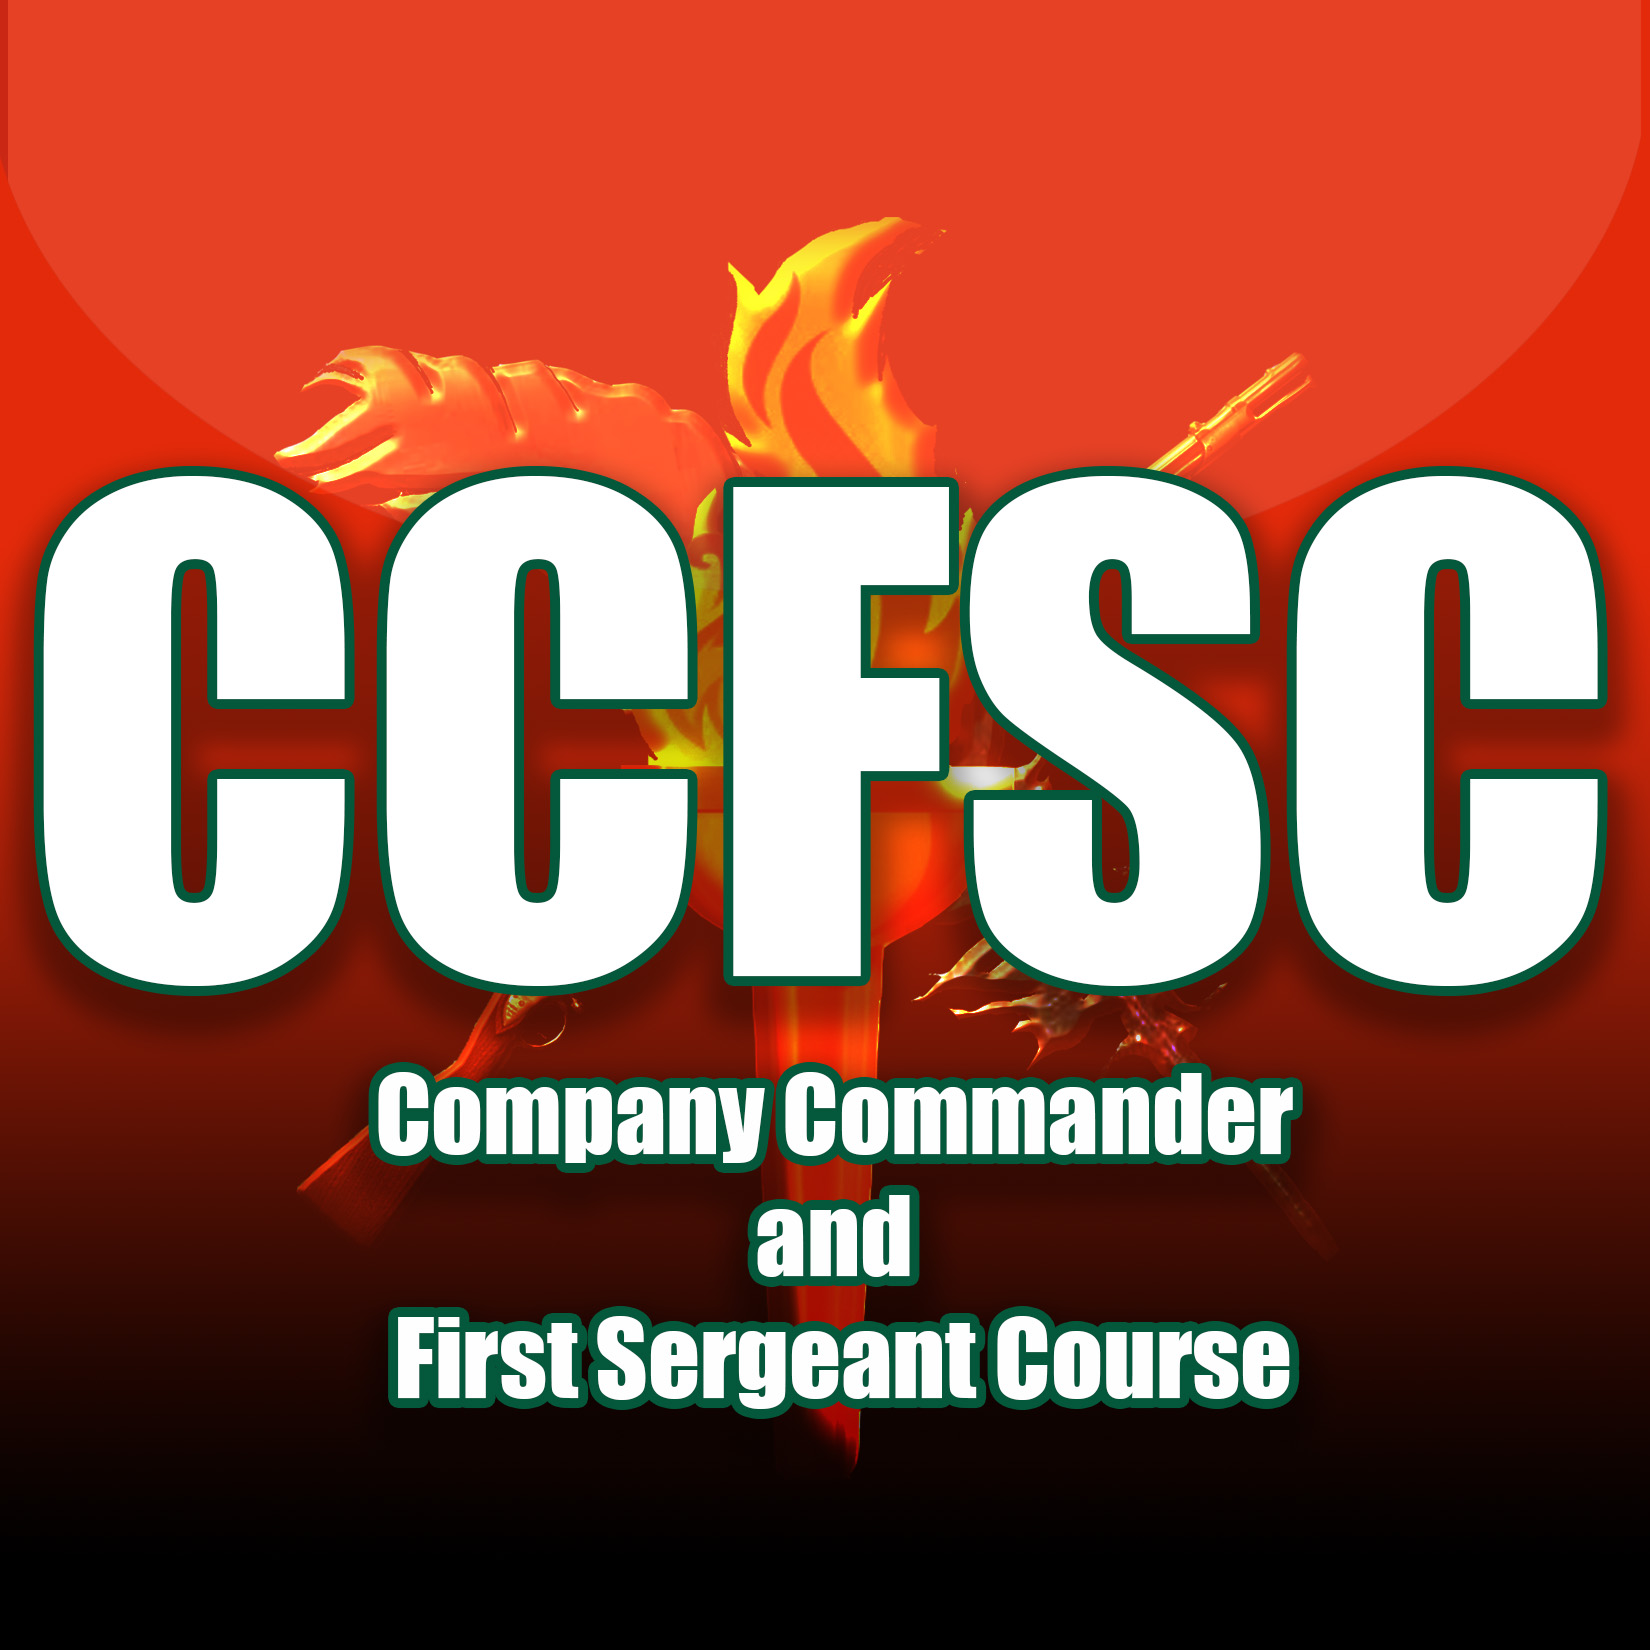 Company Commander and First Sergeant Course